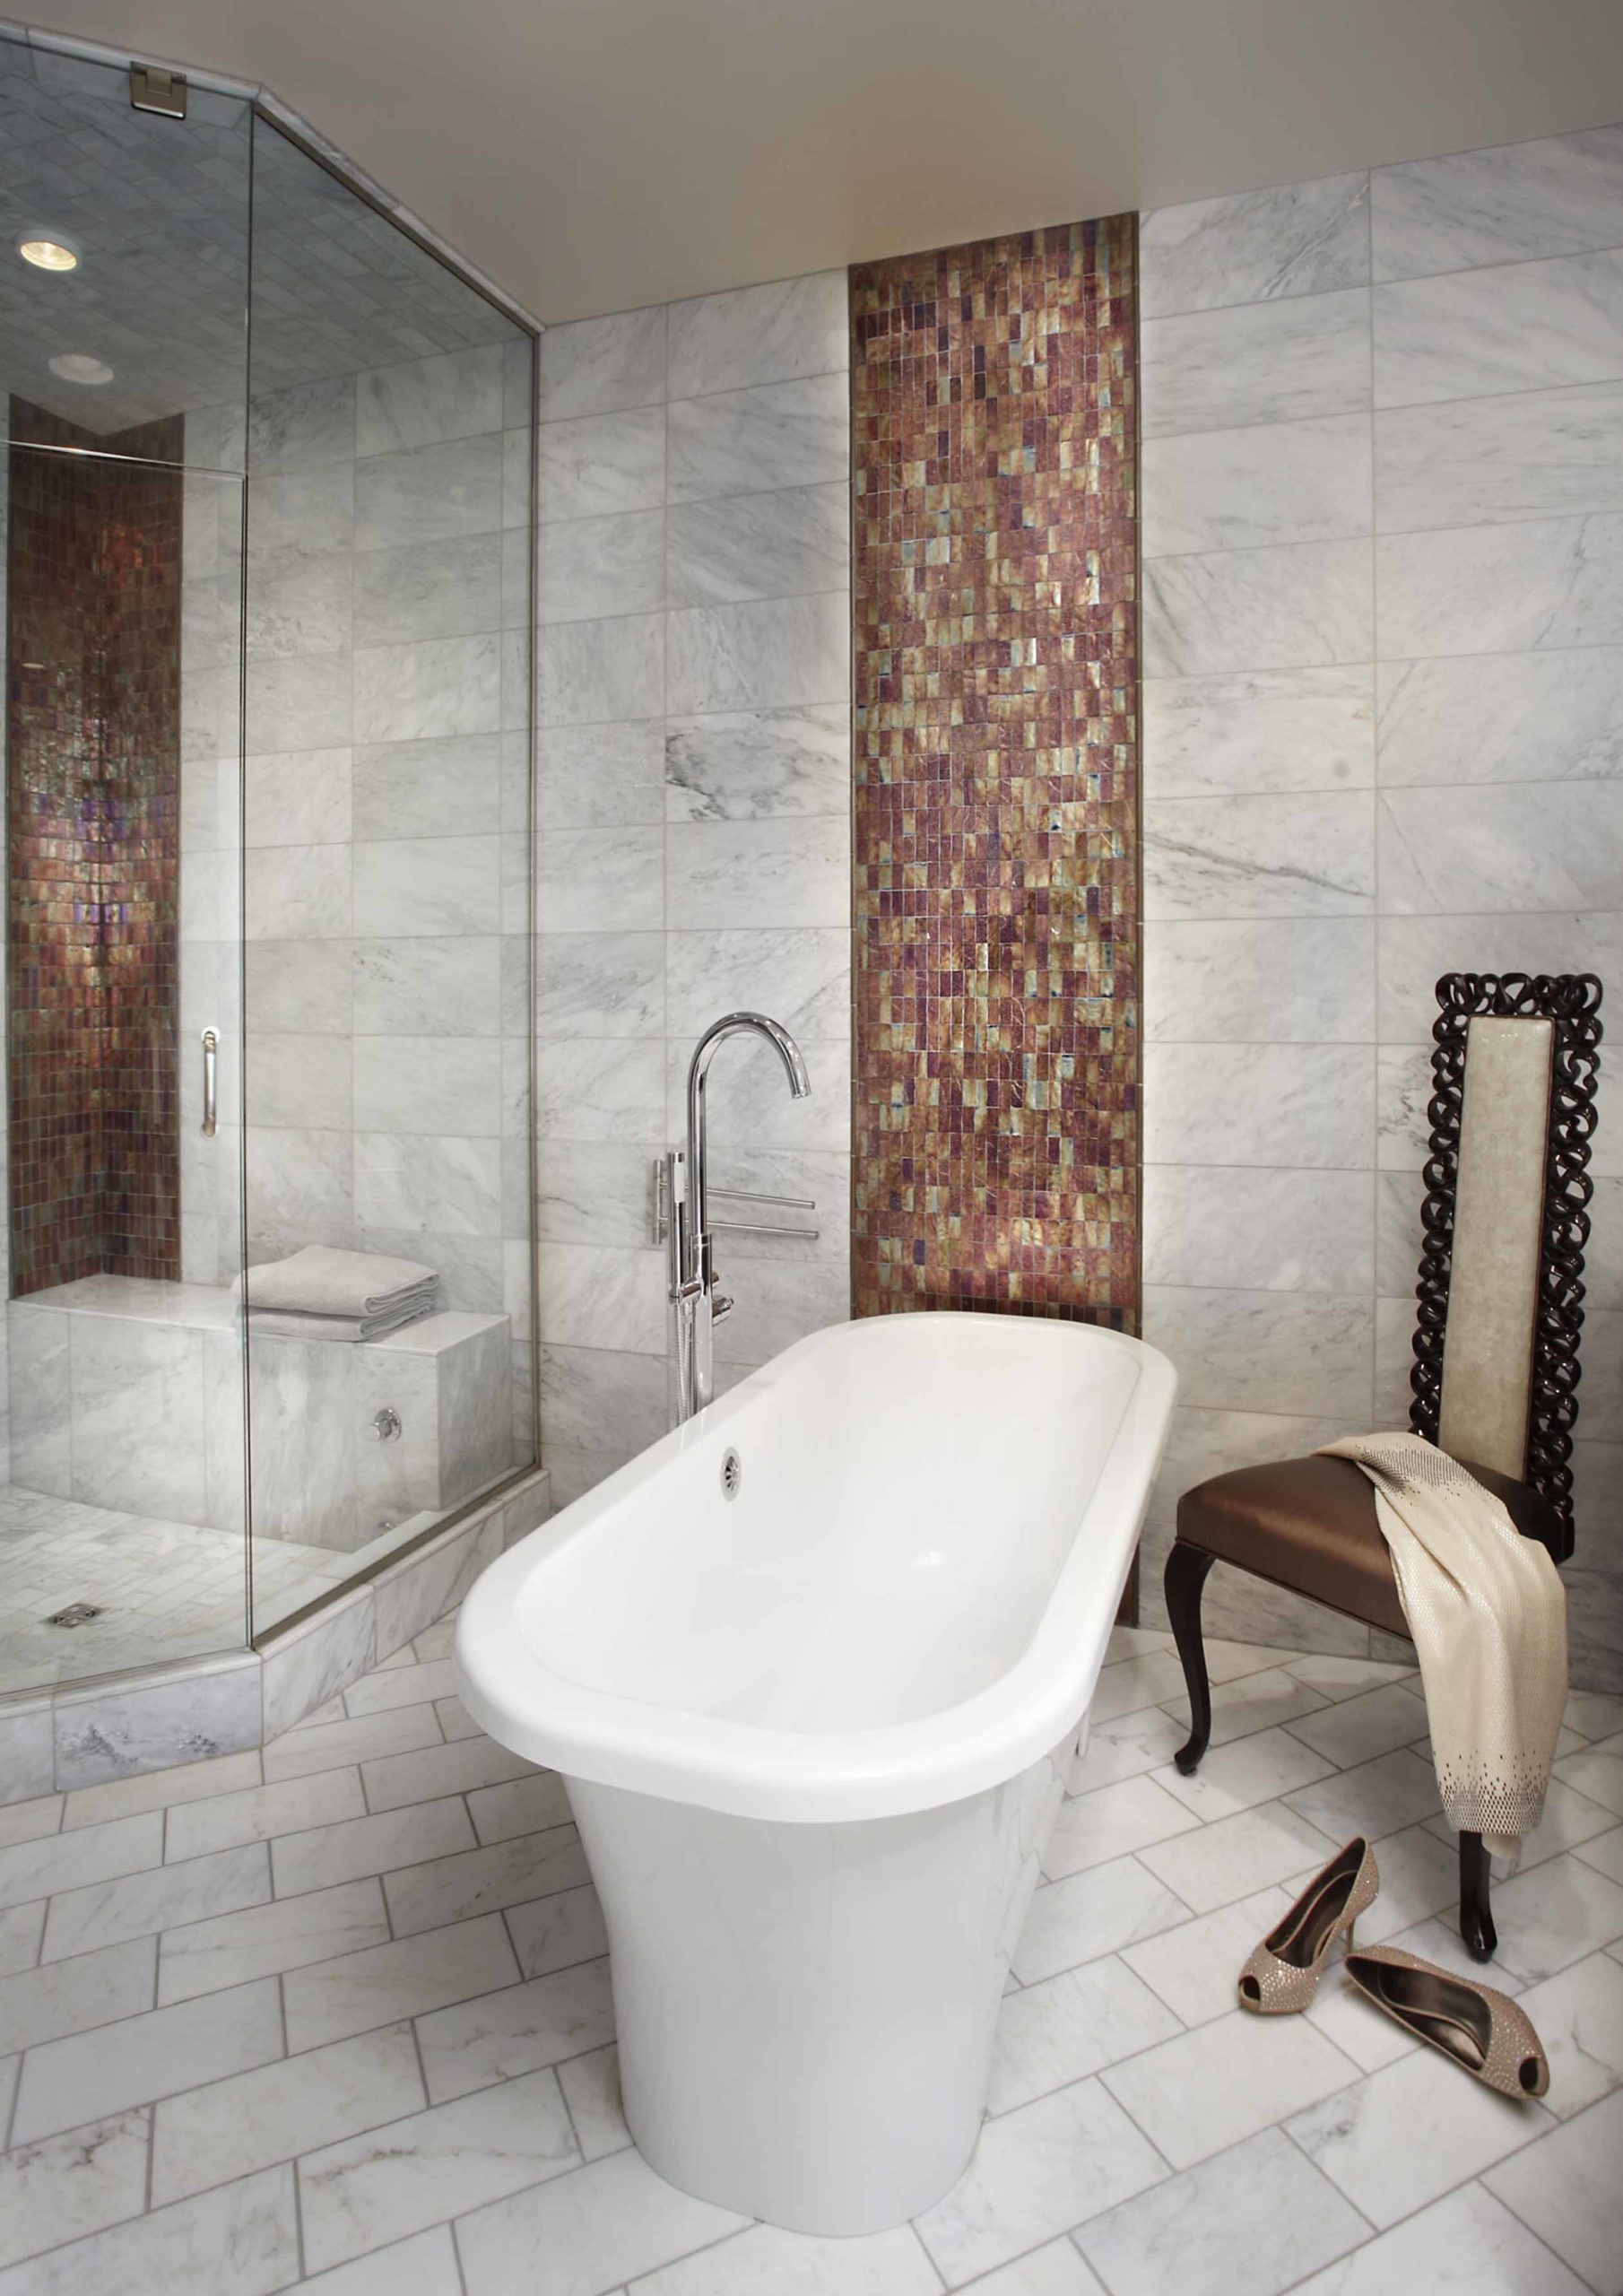 Tub in the middle of a bathroom with white tiled floors and walls